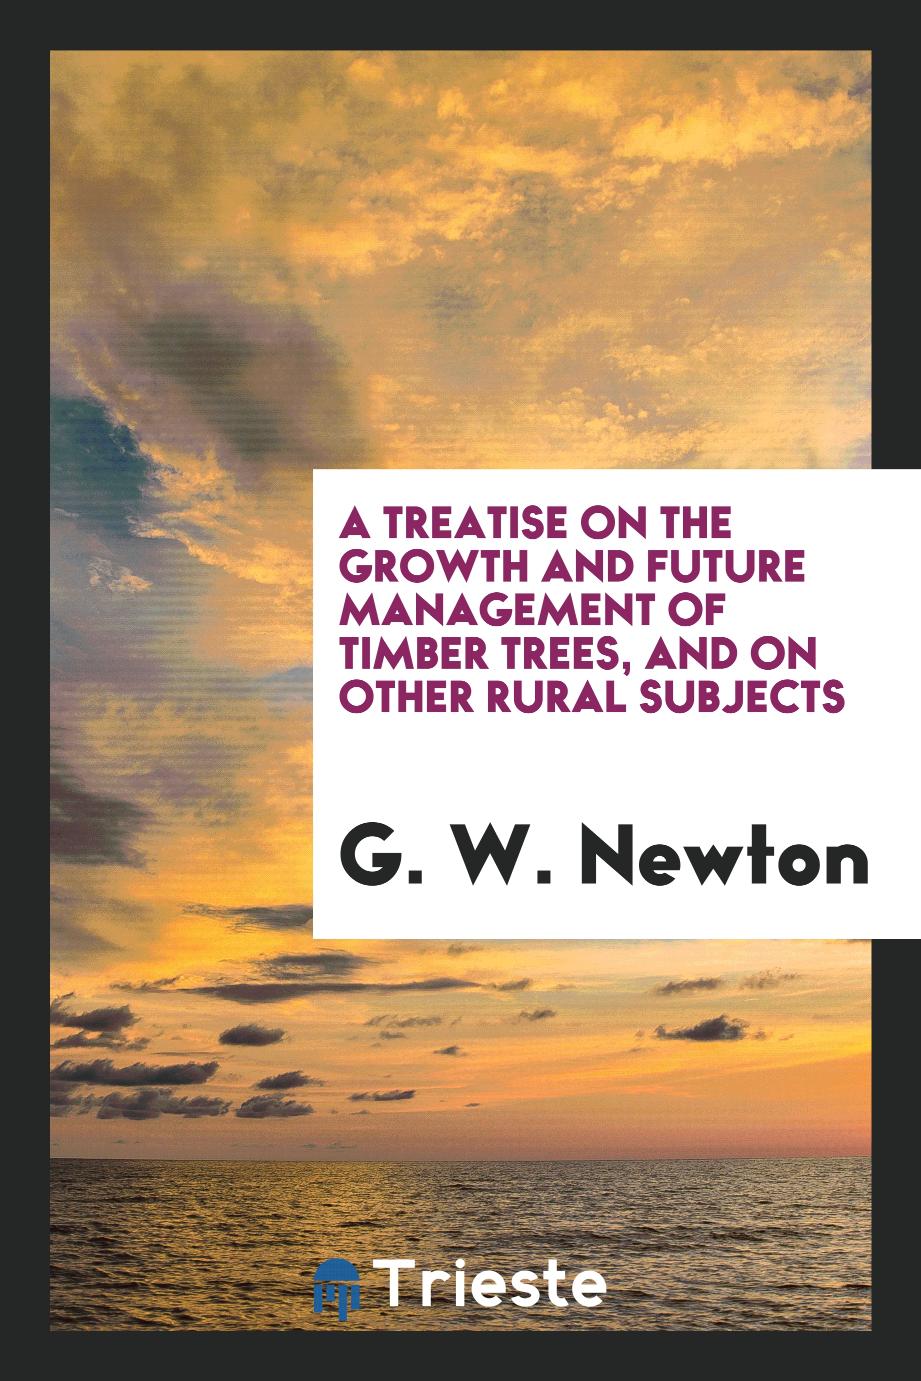 A Treatise on the Growth and Future Management of Timber Trees, and on Other Rural Subjects